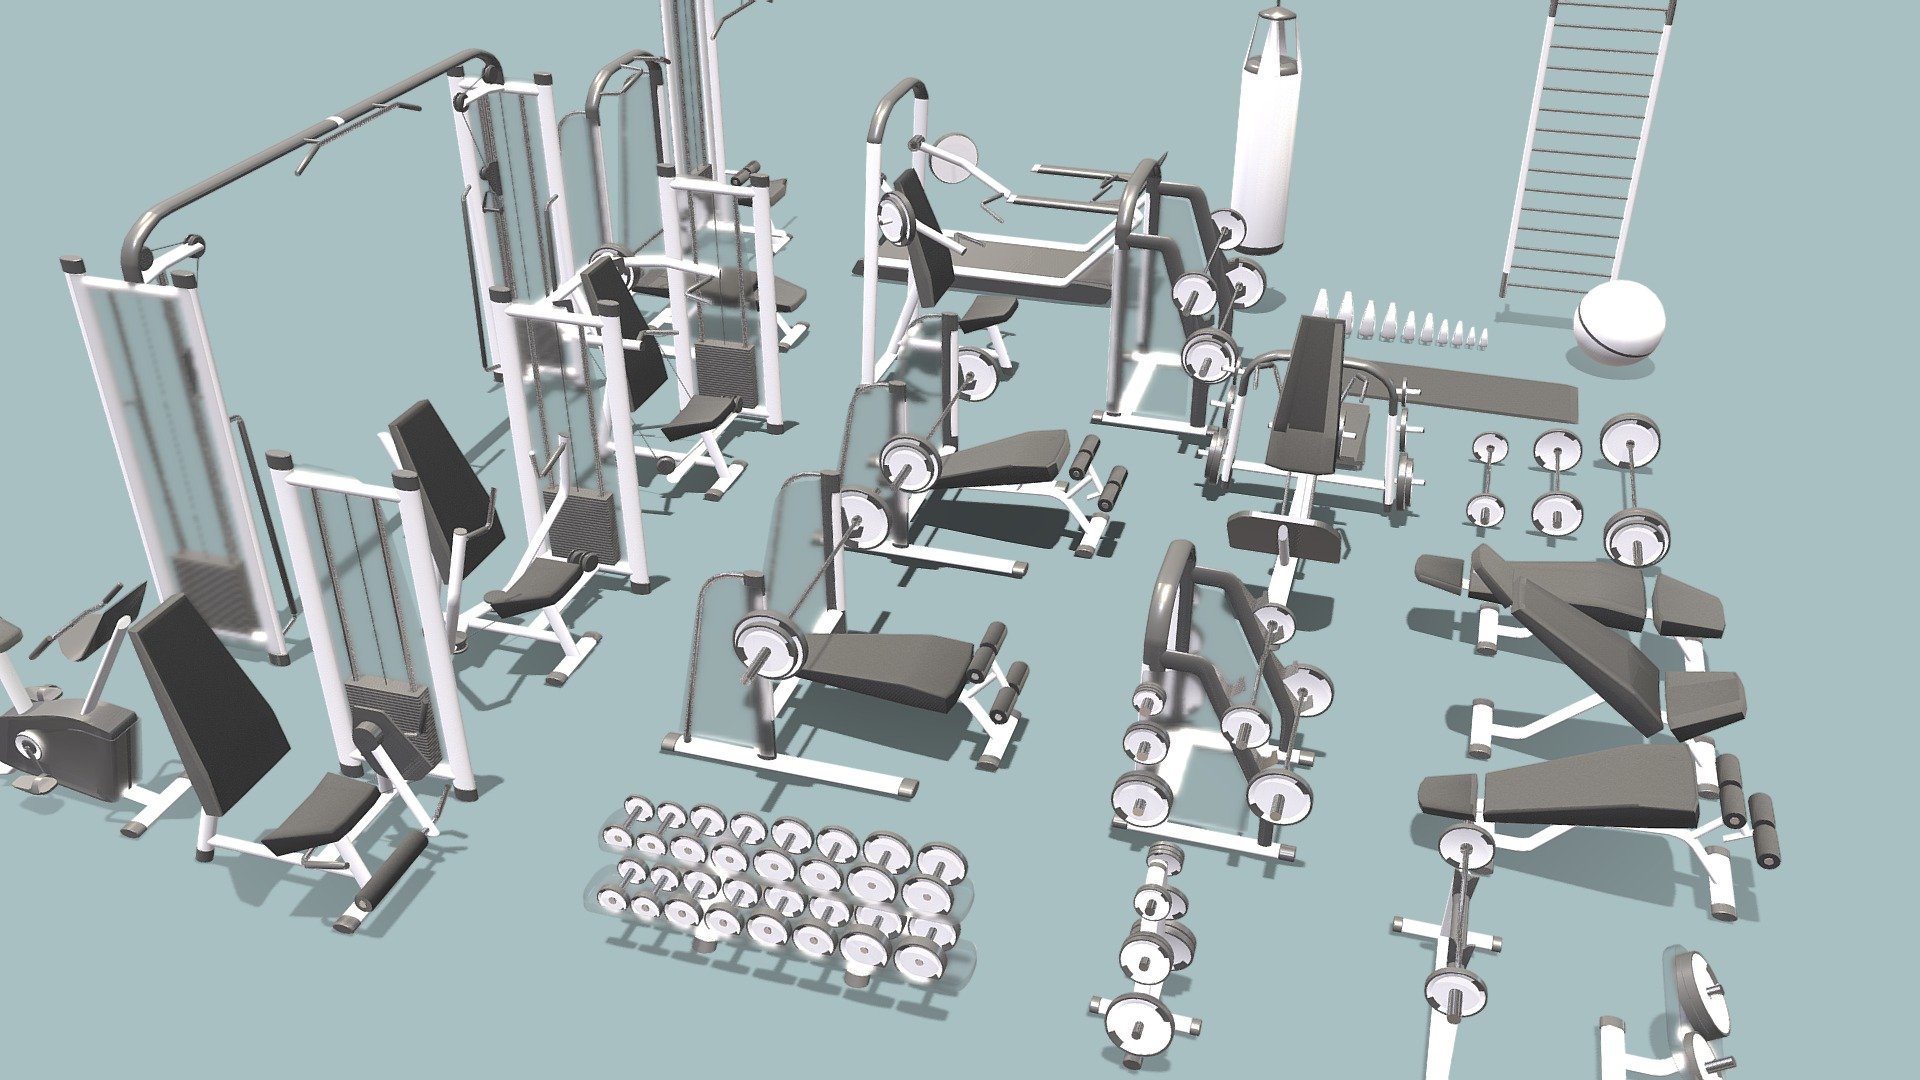 Features:
* Low poly
* Optimized
* Ready for games
* Ready for animations
* Easy to modify
* All textures included and materials applied
* All formats tested and working
* Textures PBR 512x512 - Gym Equipment Modern - 3D model by Straxer 3d model